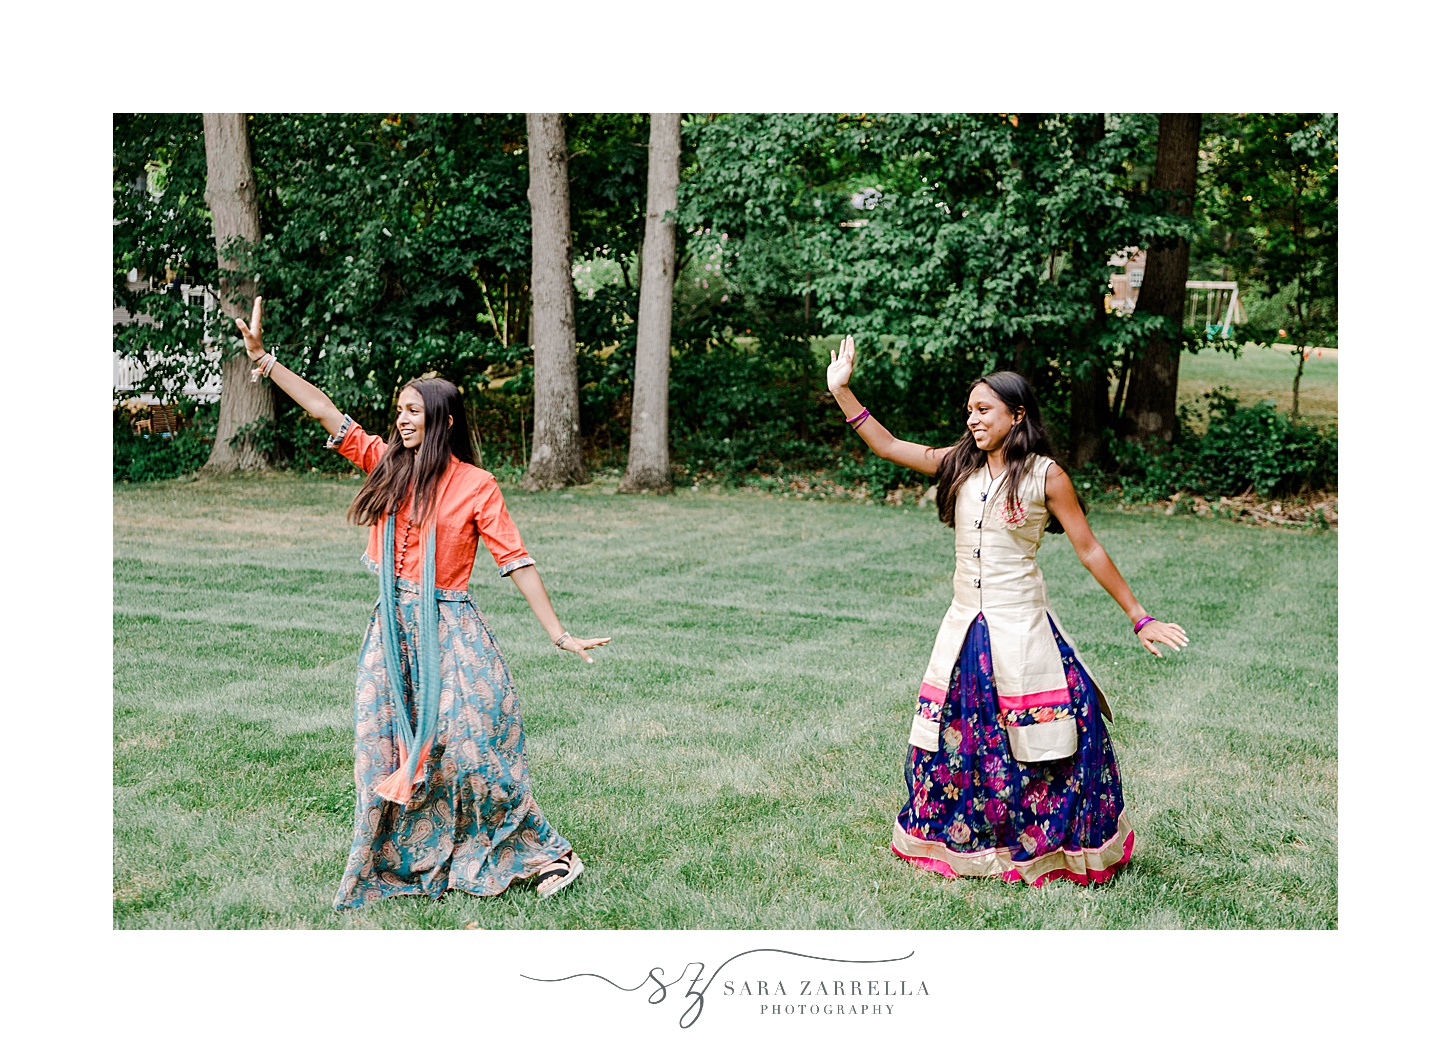 dances during traditional Indian wedding welcome event